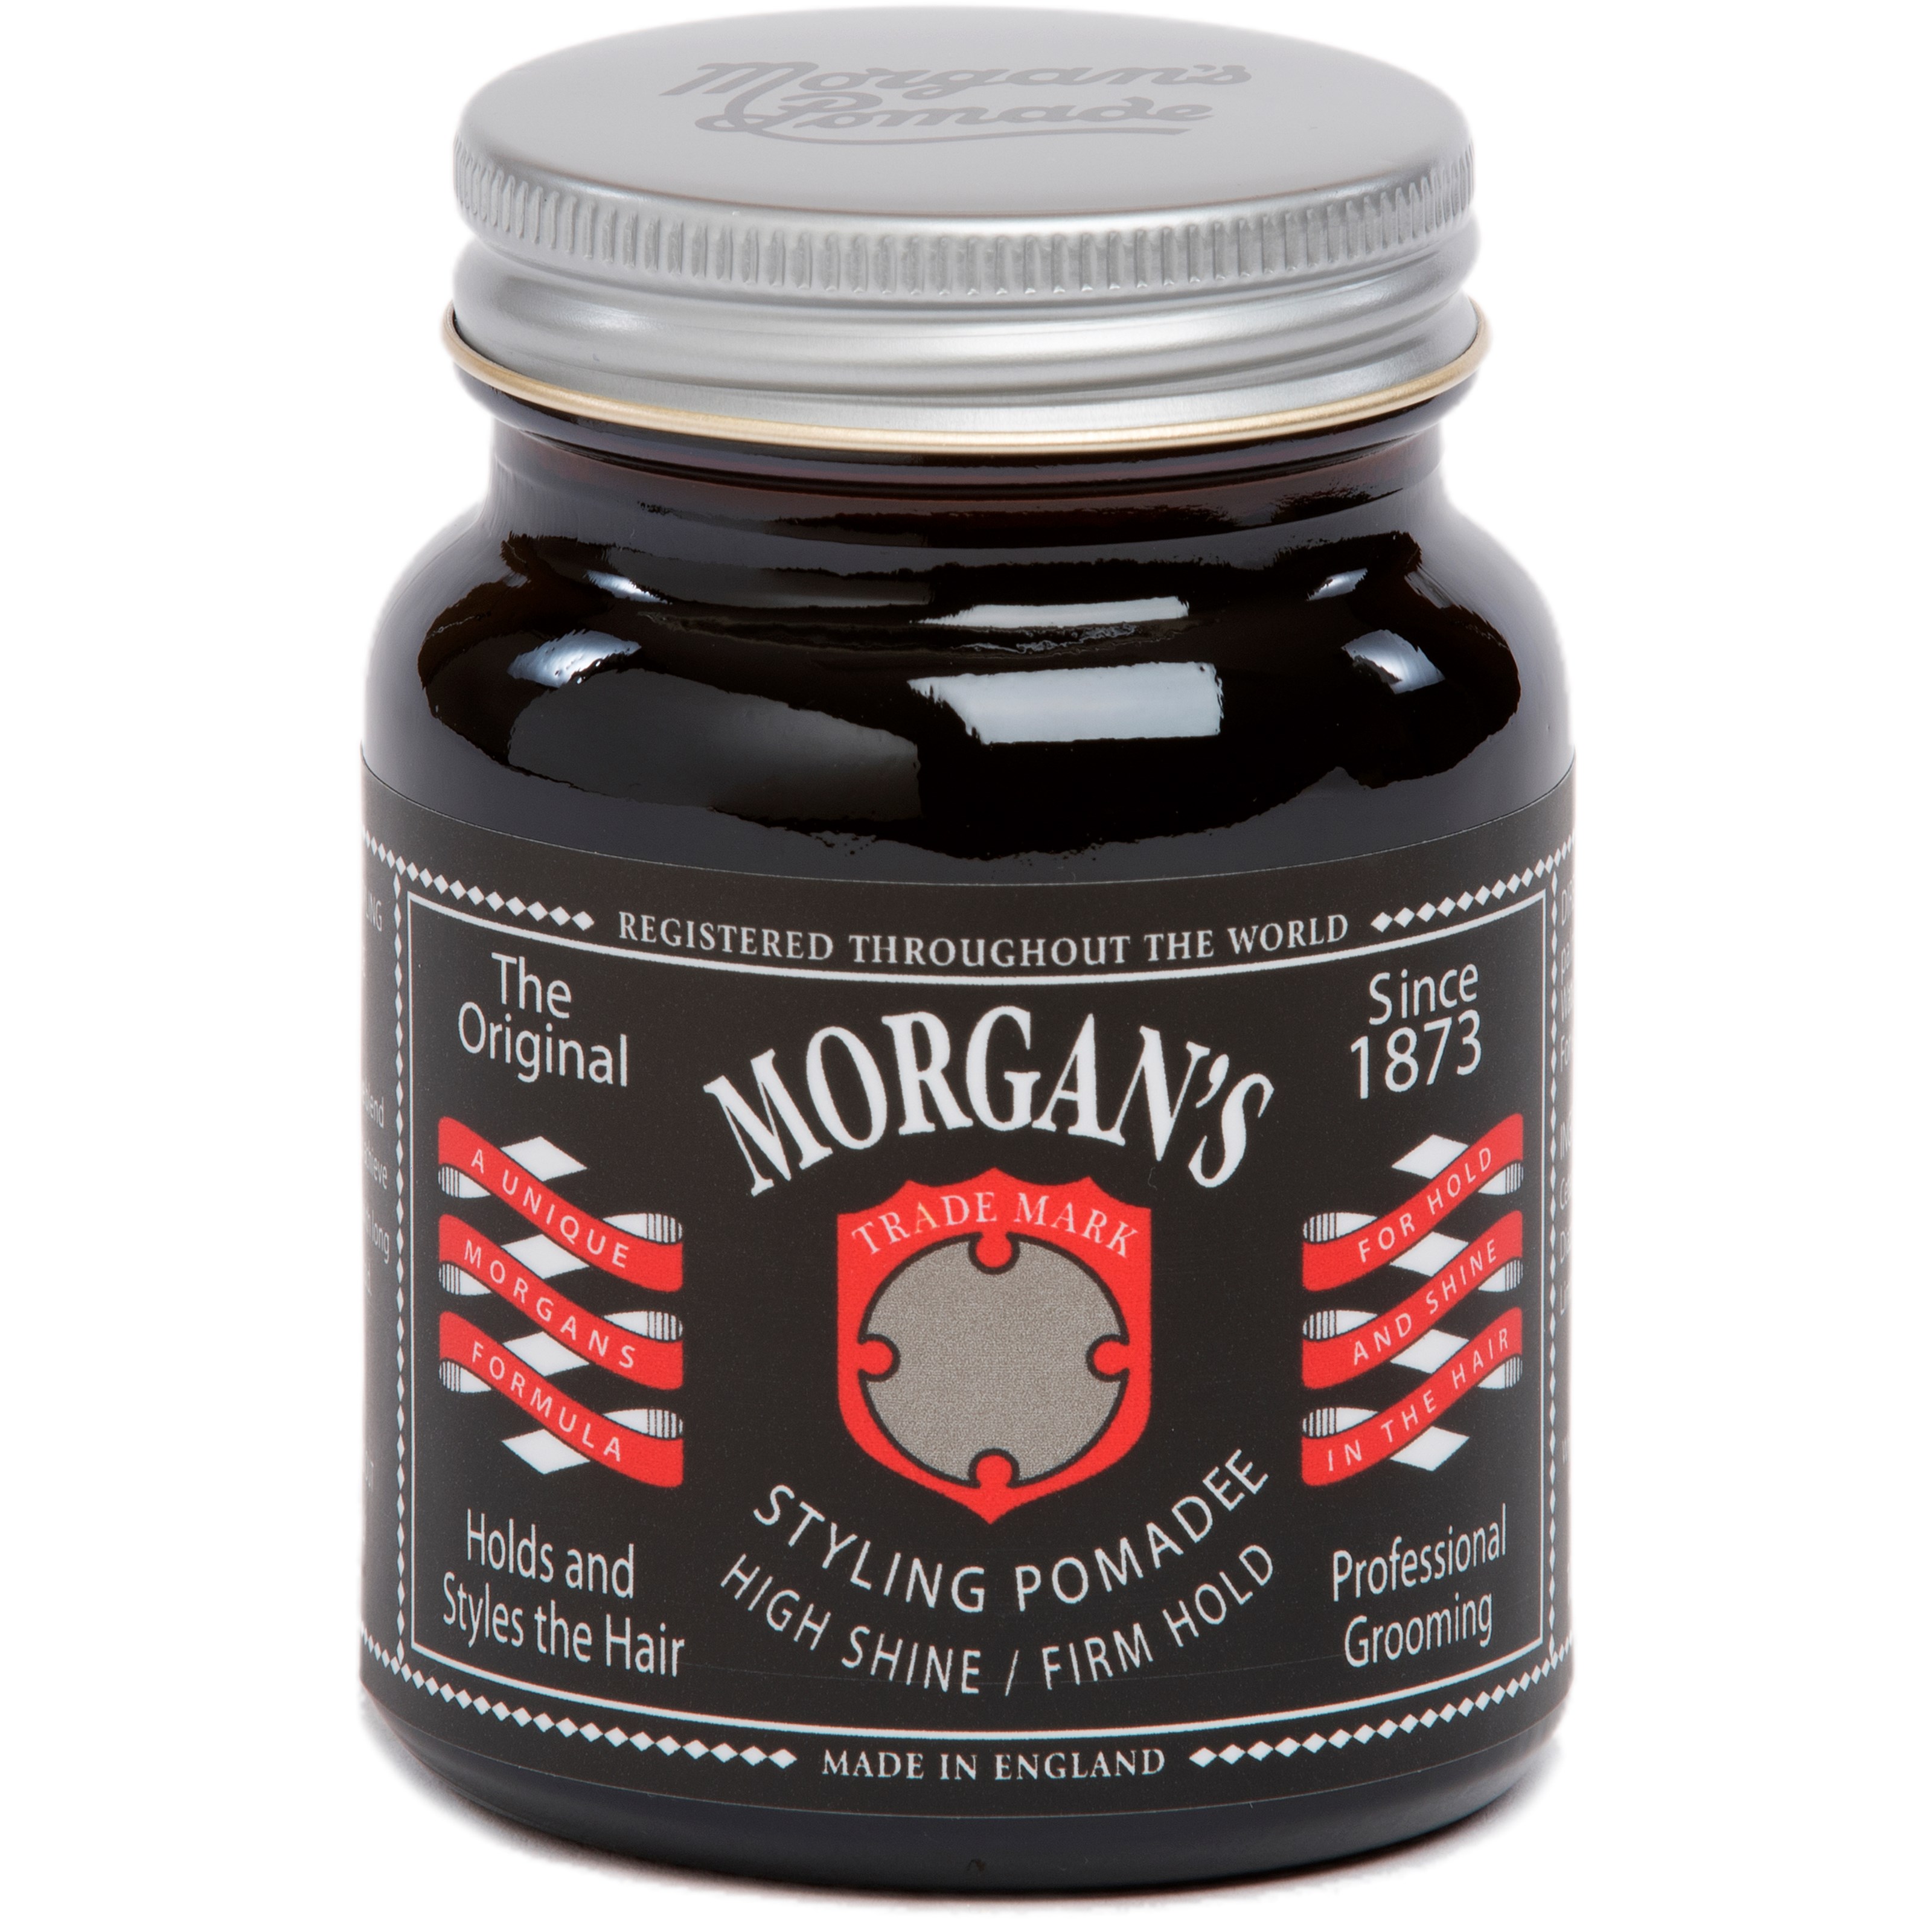 Morgans Pomade Styling Pomade Black Label - High Shine Firm Hold